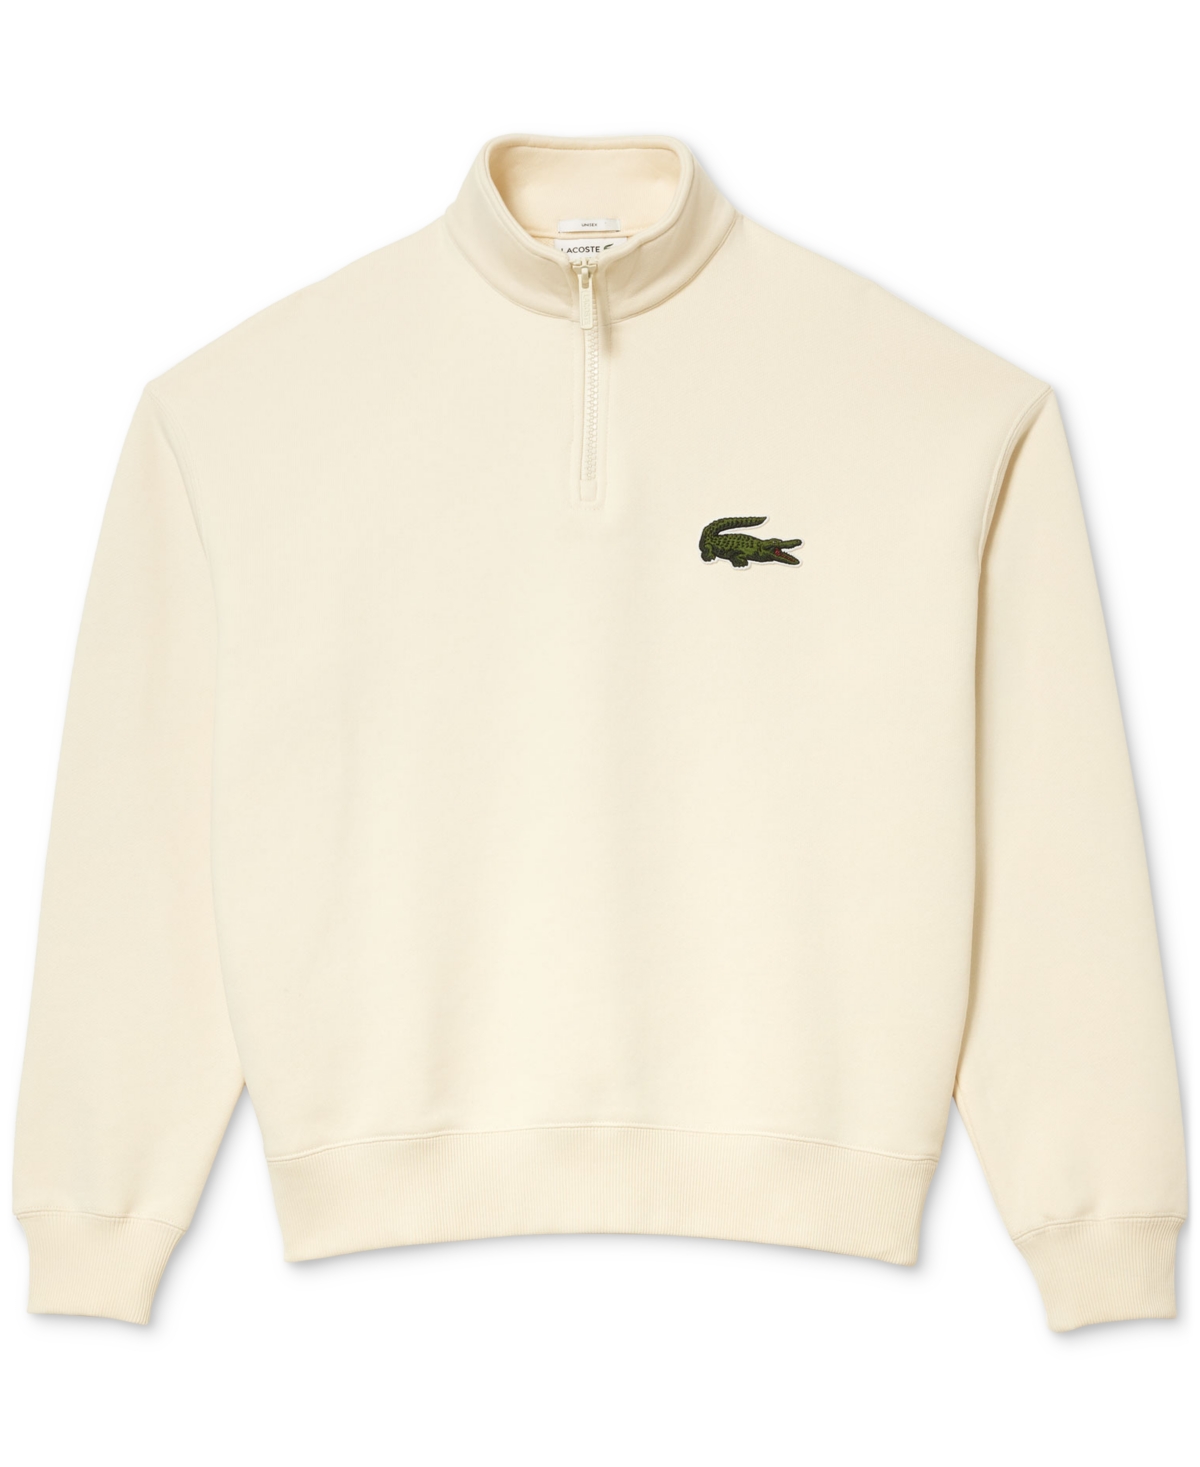 LACOSTE MEN'S RELAXED FIT FRENCH TERRY QUARTER-ZIP SWEATSHIRT